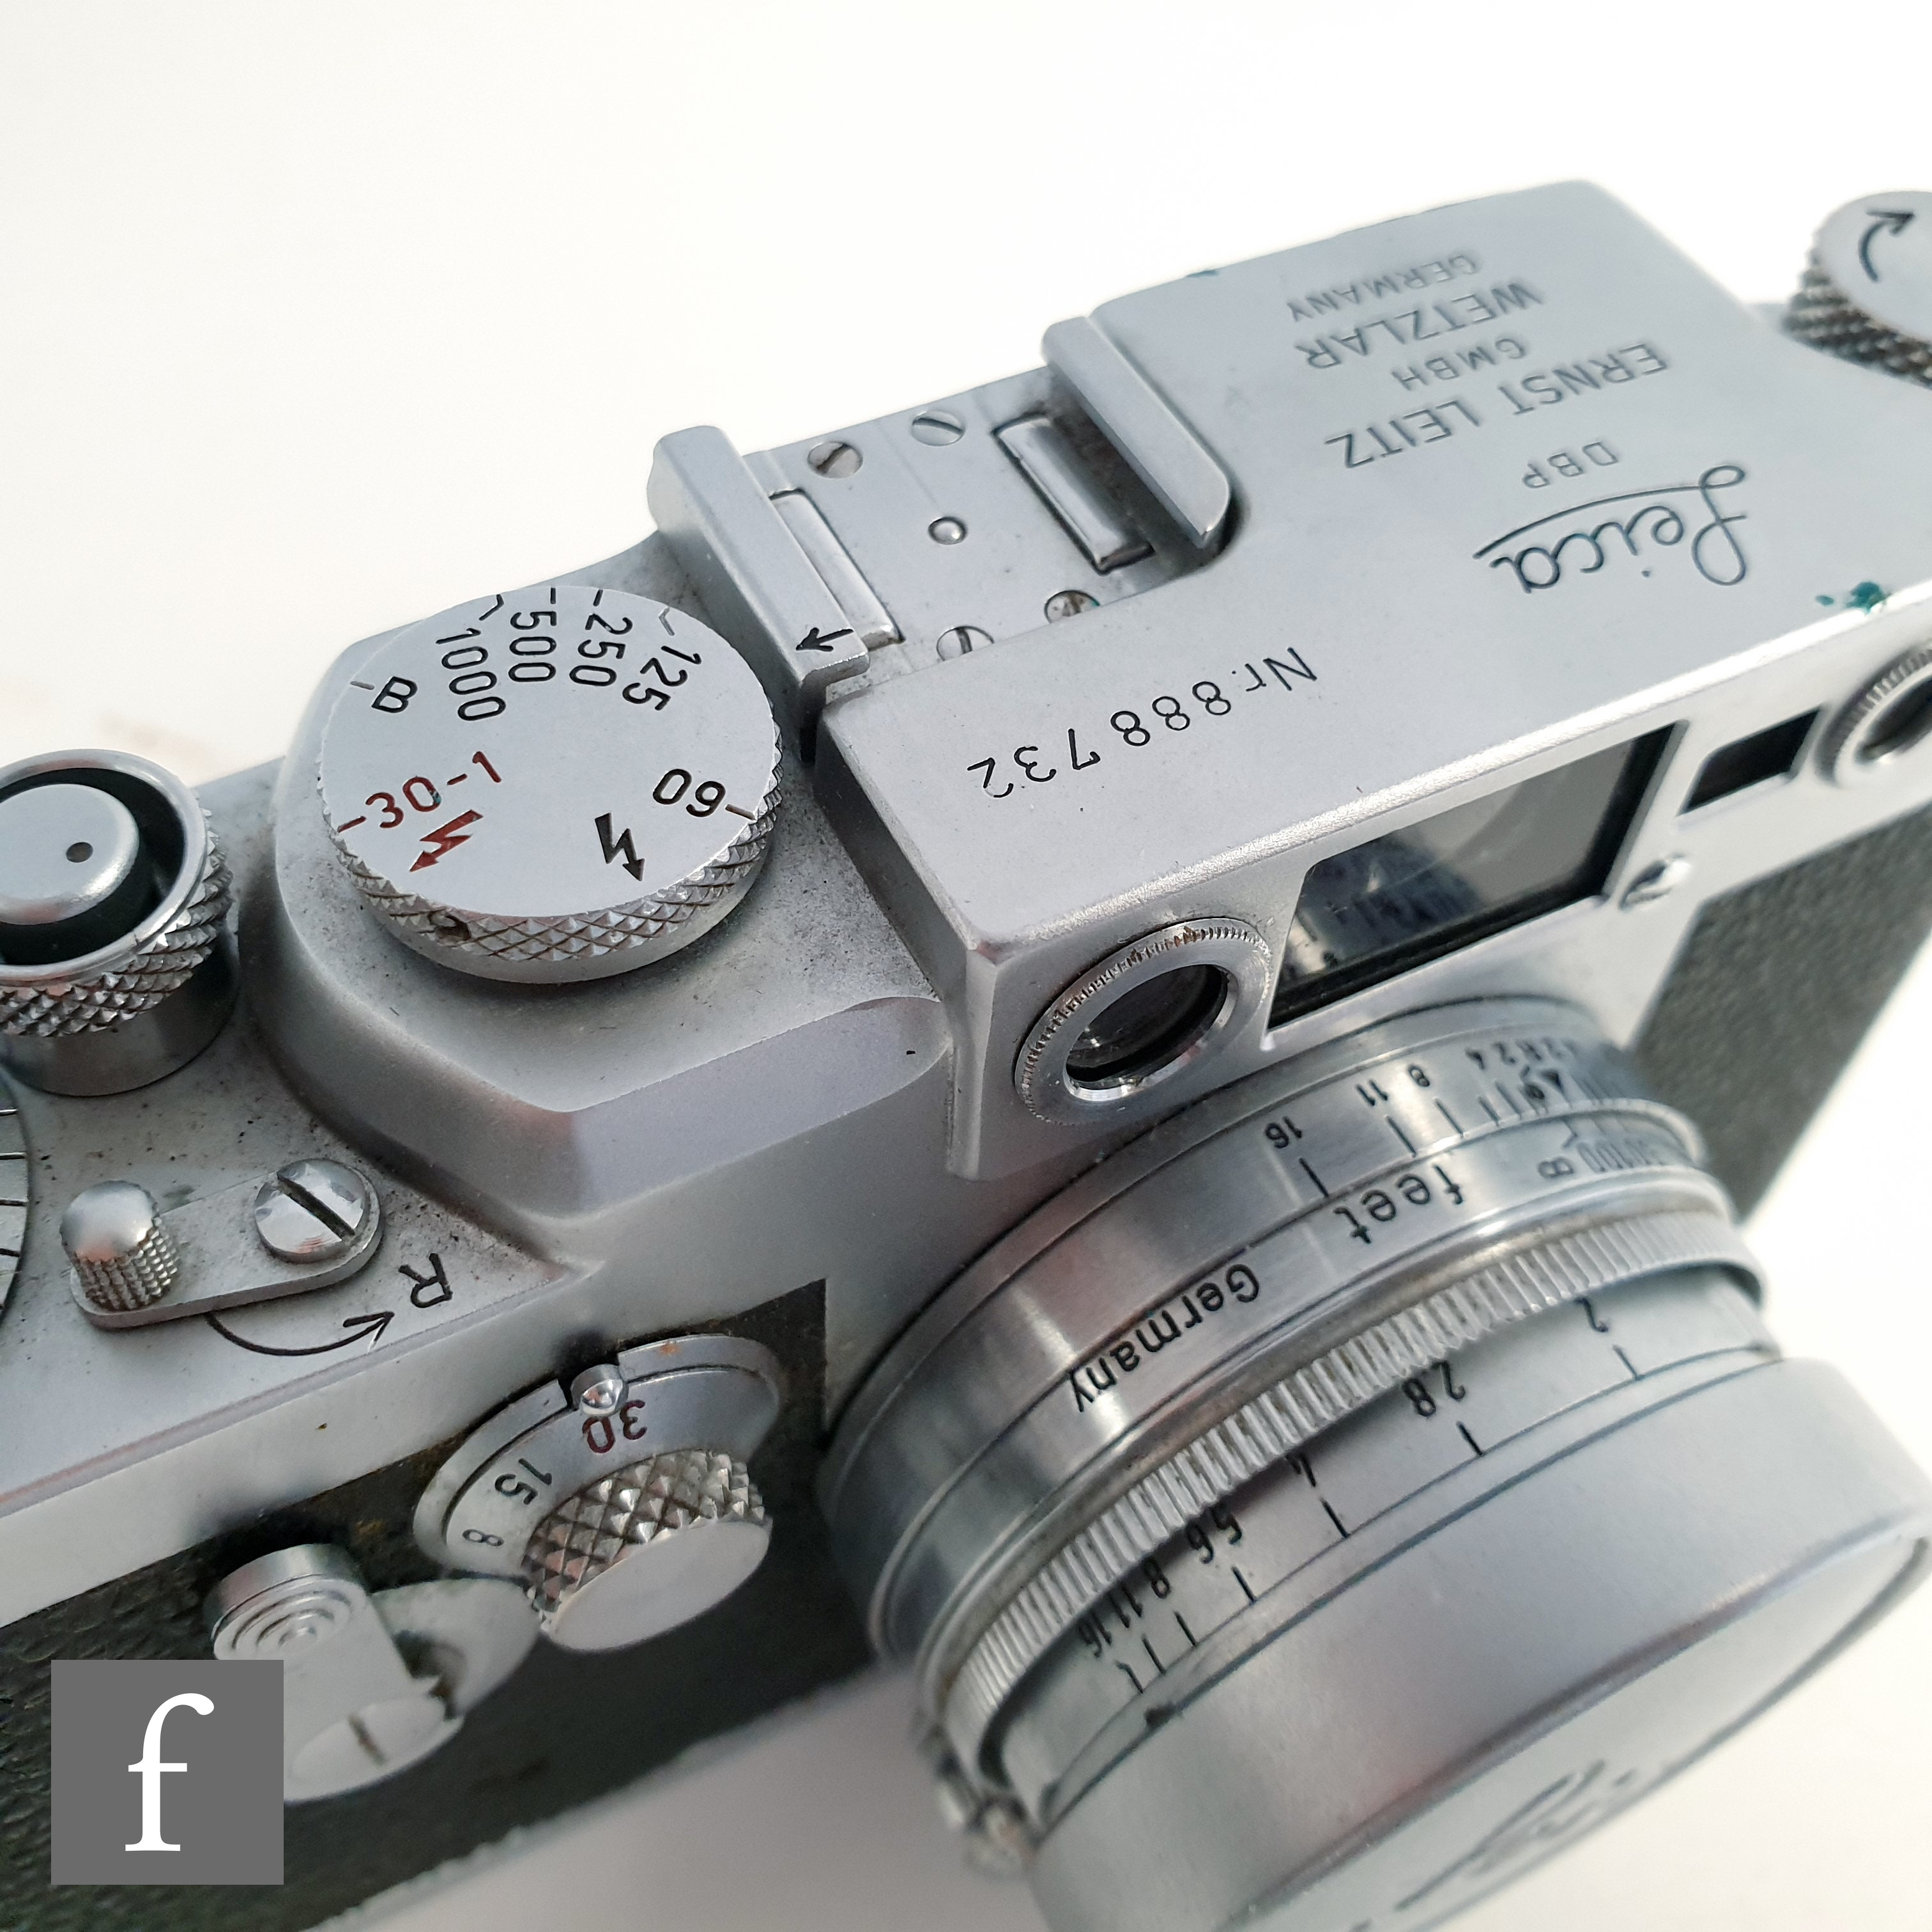 A Leica IIIG rangefinder screw mount camera, circa 1957, serial number 888732, with Ernst Leitz f= - Image 5 of 6